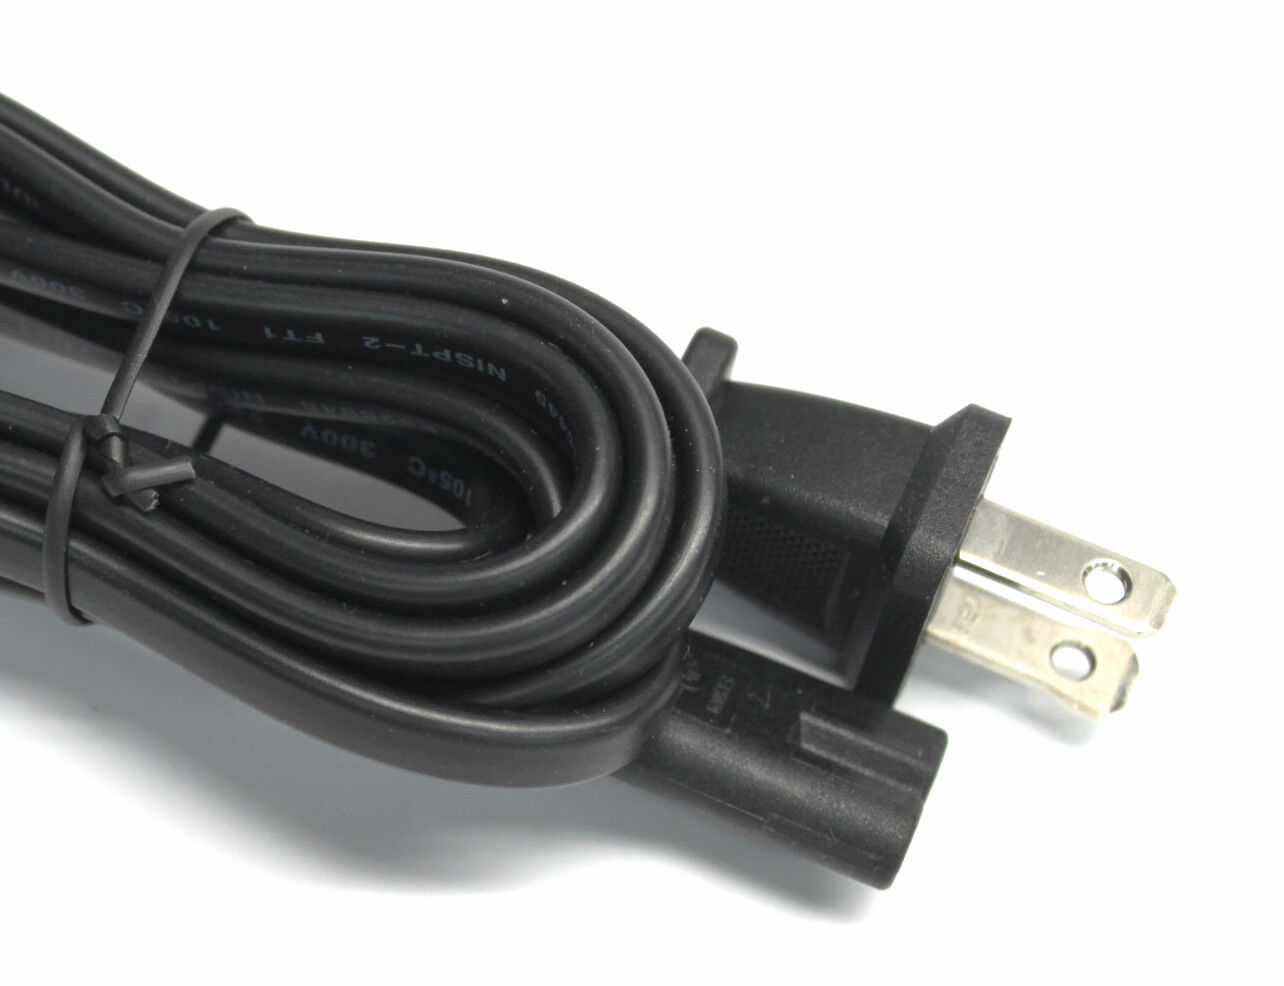 AC Power Cord Cable for XFINITY SMC Networks SMCD3GNV Wireless-N Internet Modem